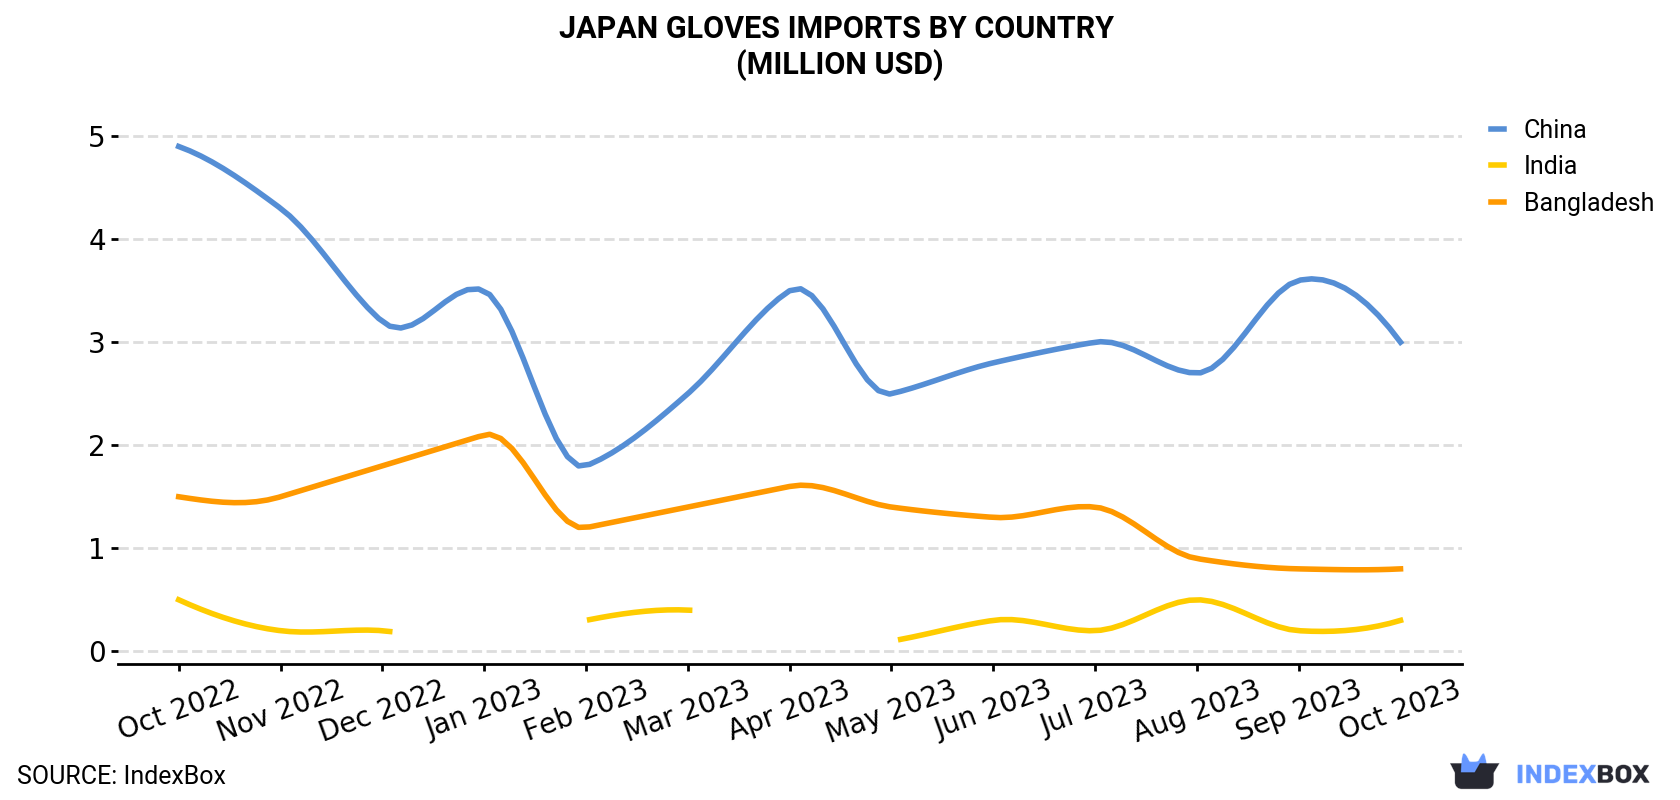 Japan Gloves Imports By Country (Million USD)